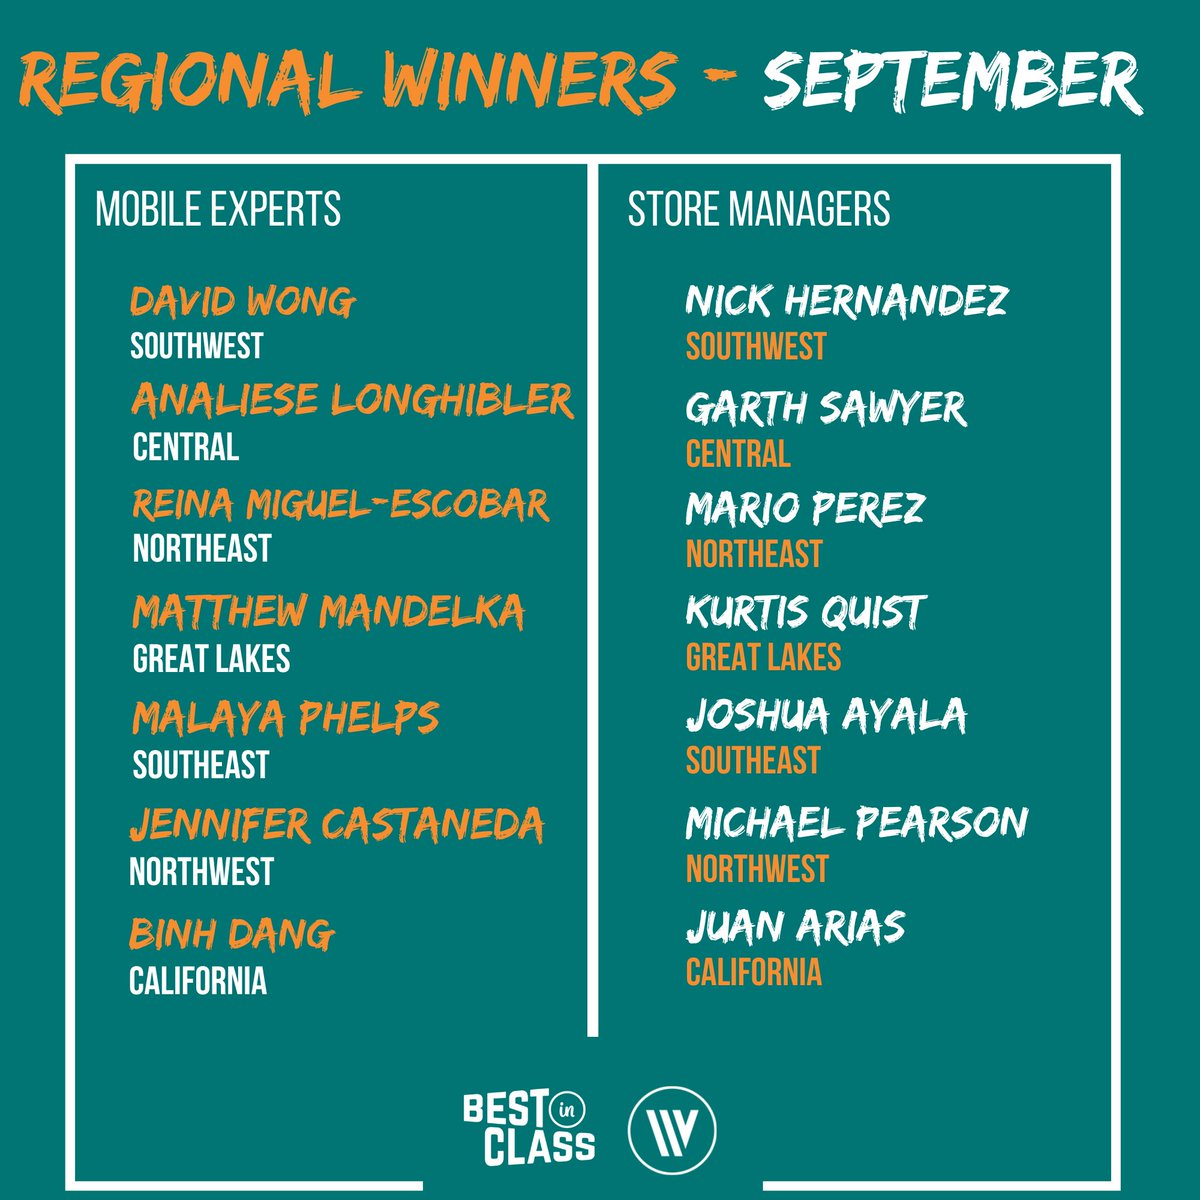 This group of people did an amazing job in September, which is why they are our September Best In Class winners! Keep up the awesome work! #BestInClass #September #ThursdayVibes